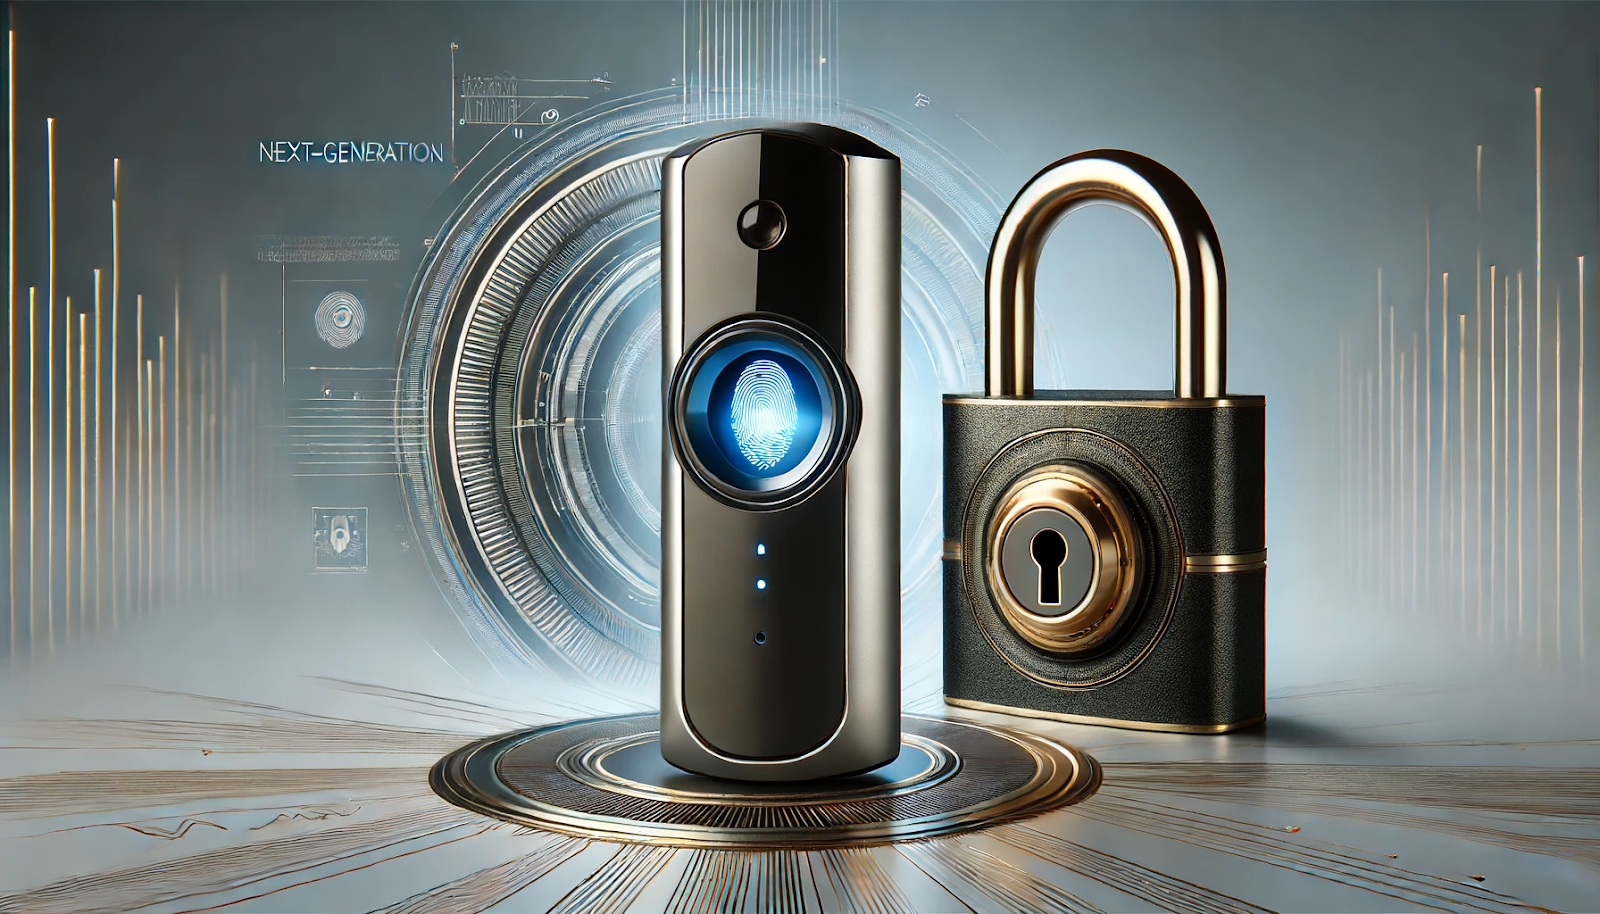 A photorealistic image depicting next-generation access control technologies, featuring a modern biometric scanner and smart lock with a sleek black and gold design, symbolizing the advancement and security of contemporary access control systems.